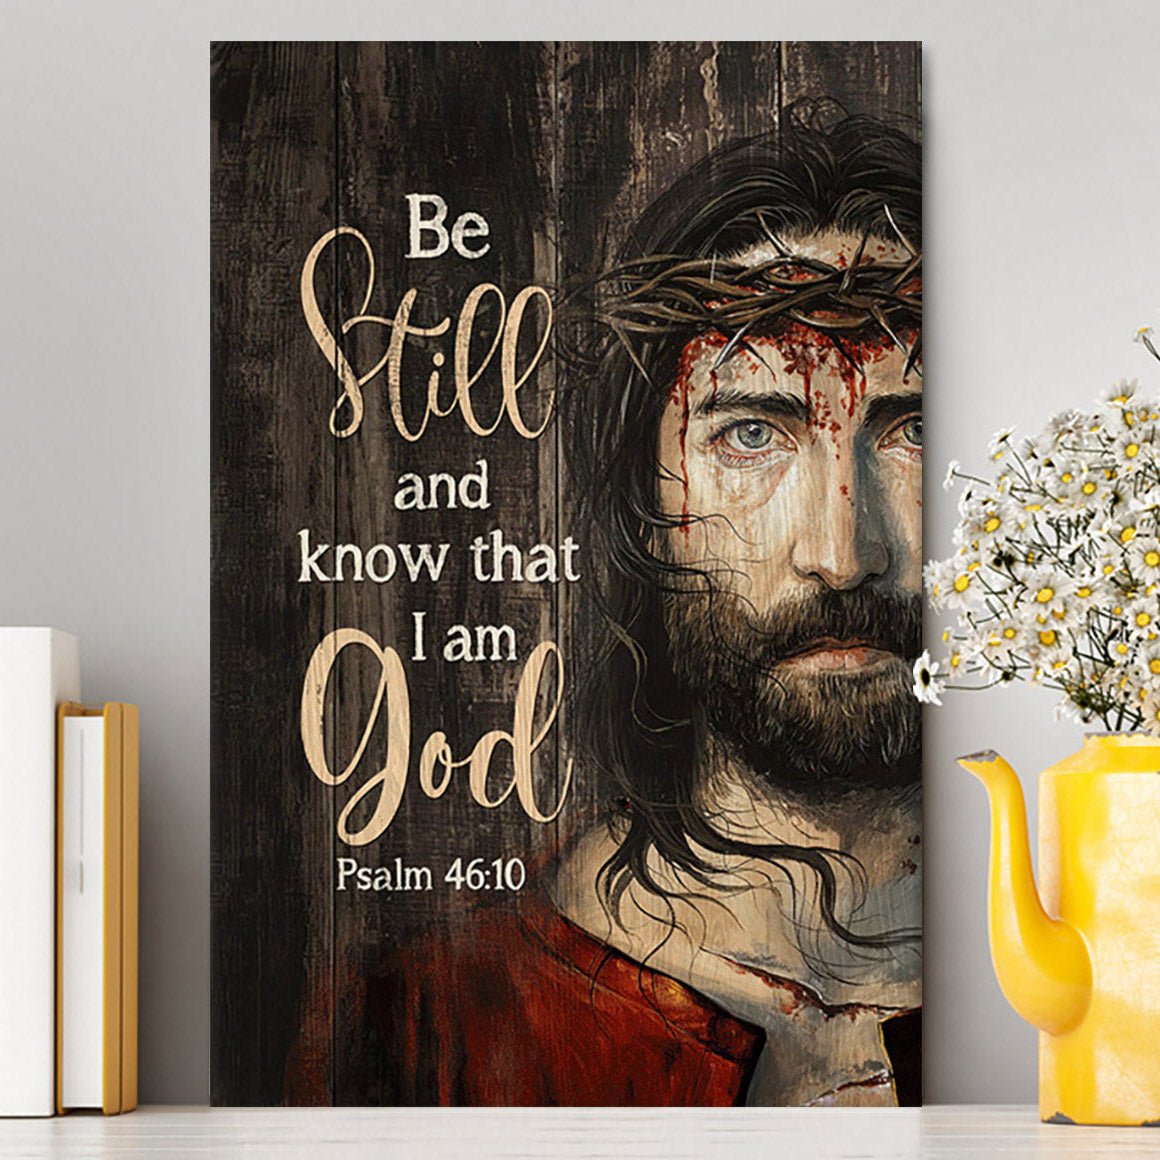 Crown Of Thorn Canvas- Be Still And Know That I Am God Canvas Wall Art - Christian Canvas Prints - Bible Verse Canvas Art